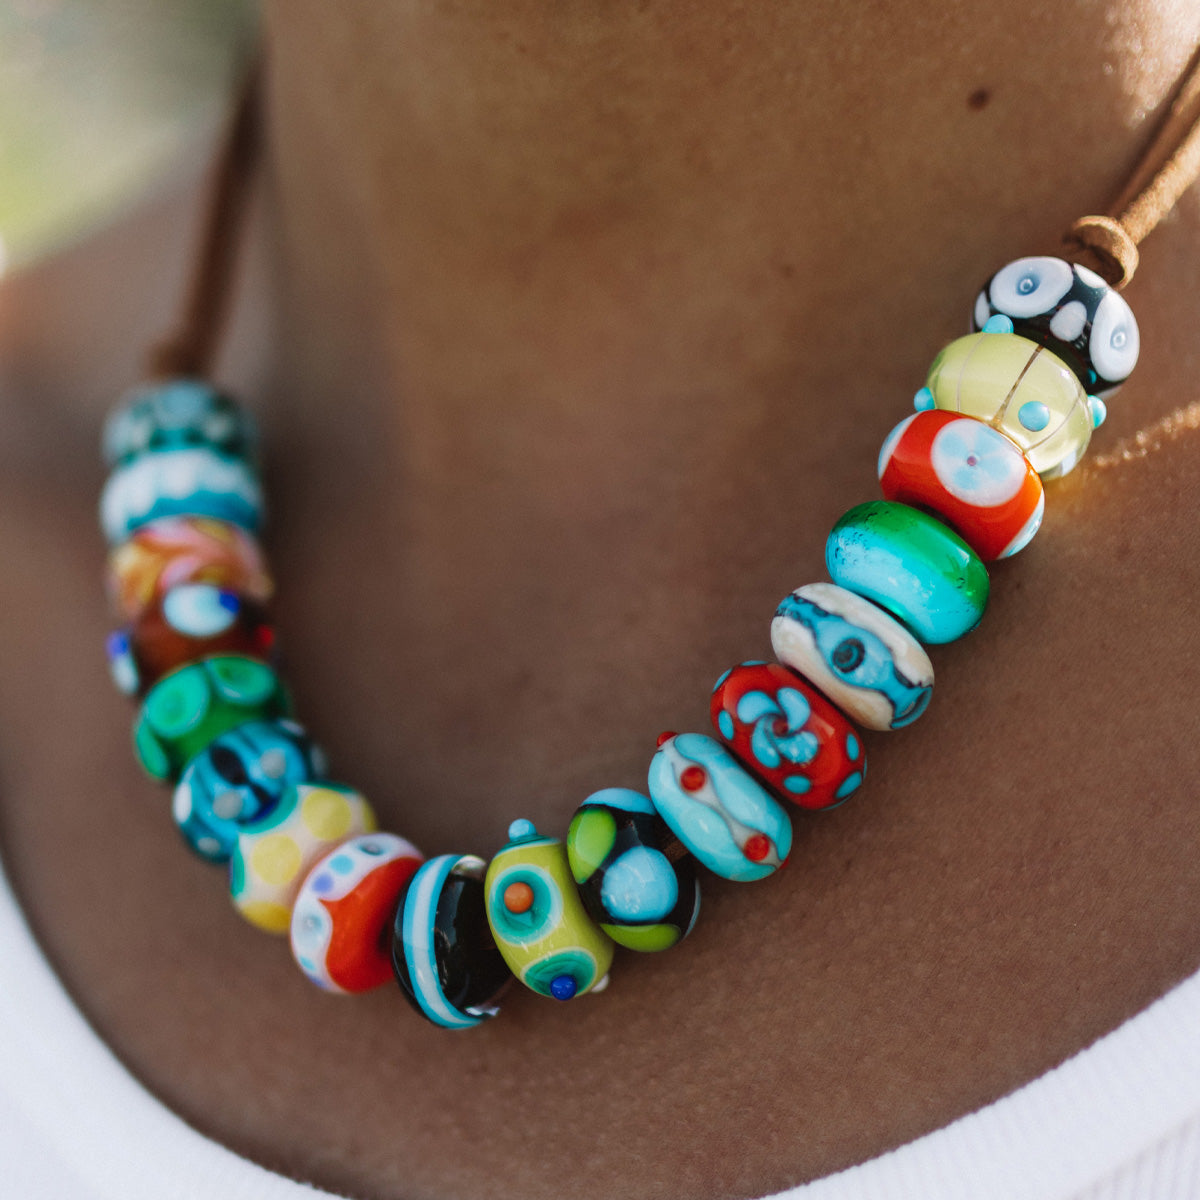 Colourful glass bead necklace representing worldwide travel destinations.